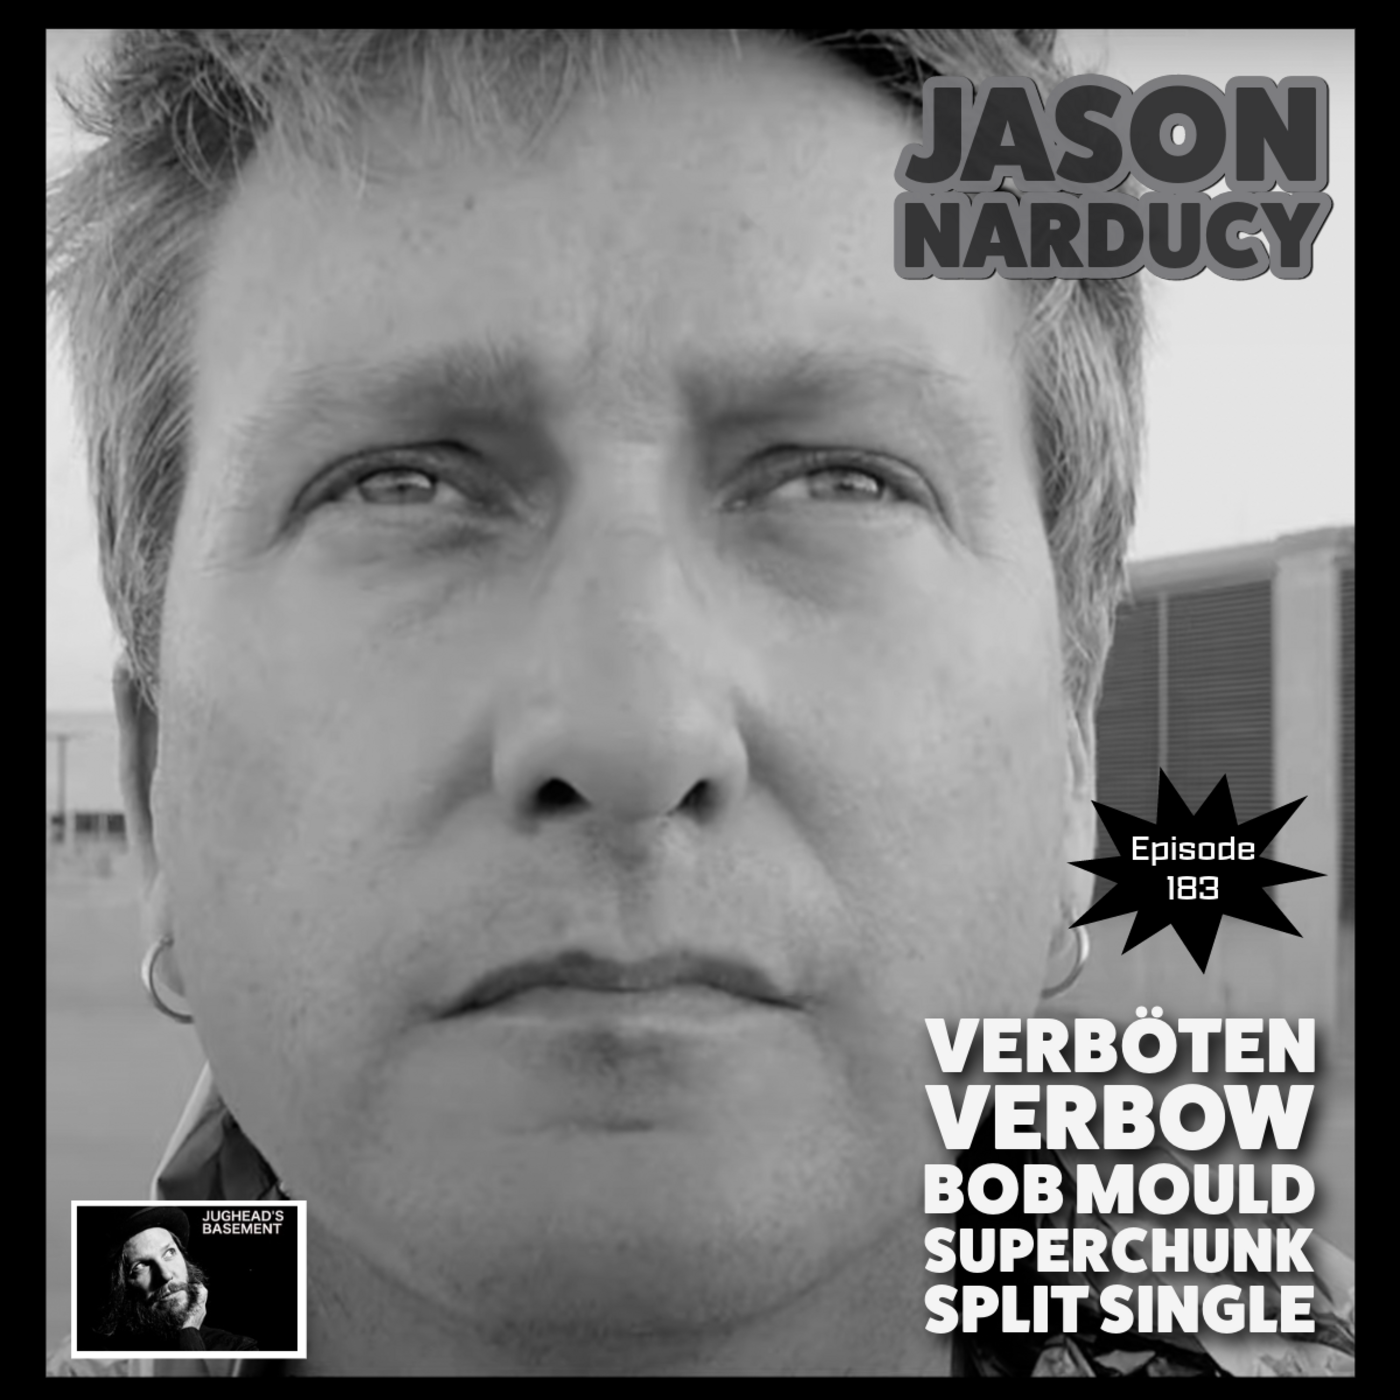 Episode 183: Episode 183: Jason Narducy of Verbow, Split Single, The Bob Mould Band, and Superchunk on LoFi Interviews with HiFi Guests